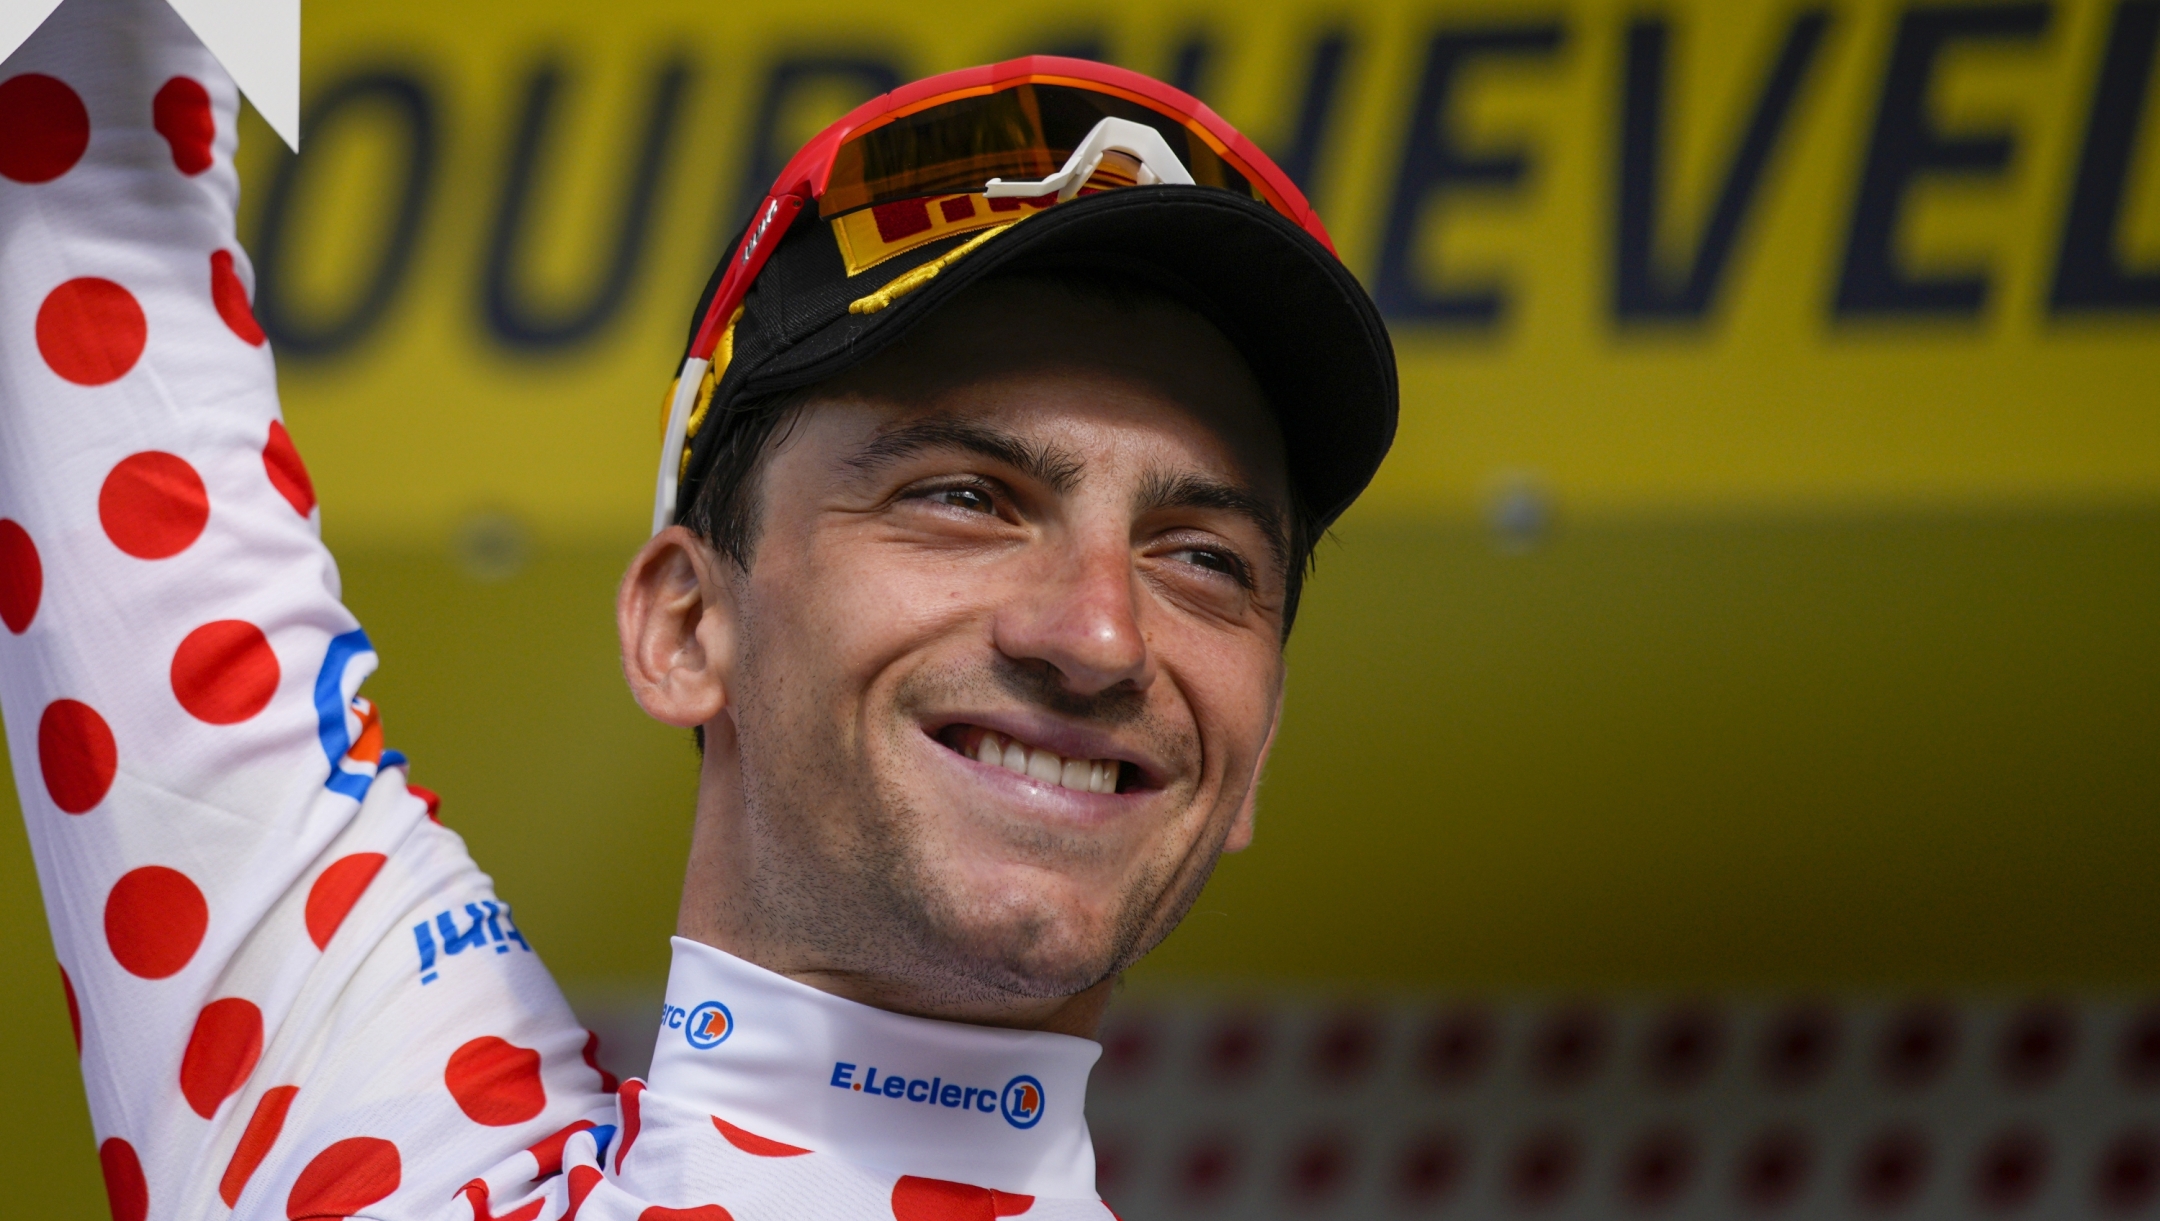 Italy's Giulio Ciccone, wearing the best climber's dotted jersey, celebrates on the podium after the seventeenth stage of the Tour de France cycling race over 166 kilometers (103 miles) with start in Saint-Gervais Mont-Blanc and finish in Courchevel, France, Wednesday, July 19, 2023. (AP Photo/Daniel Cole)